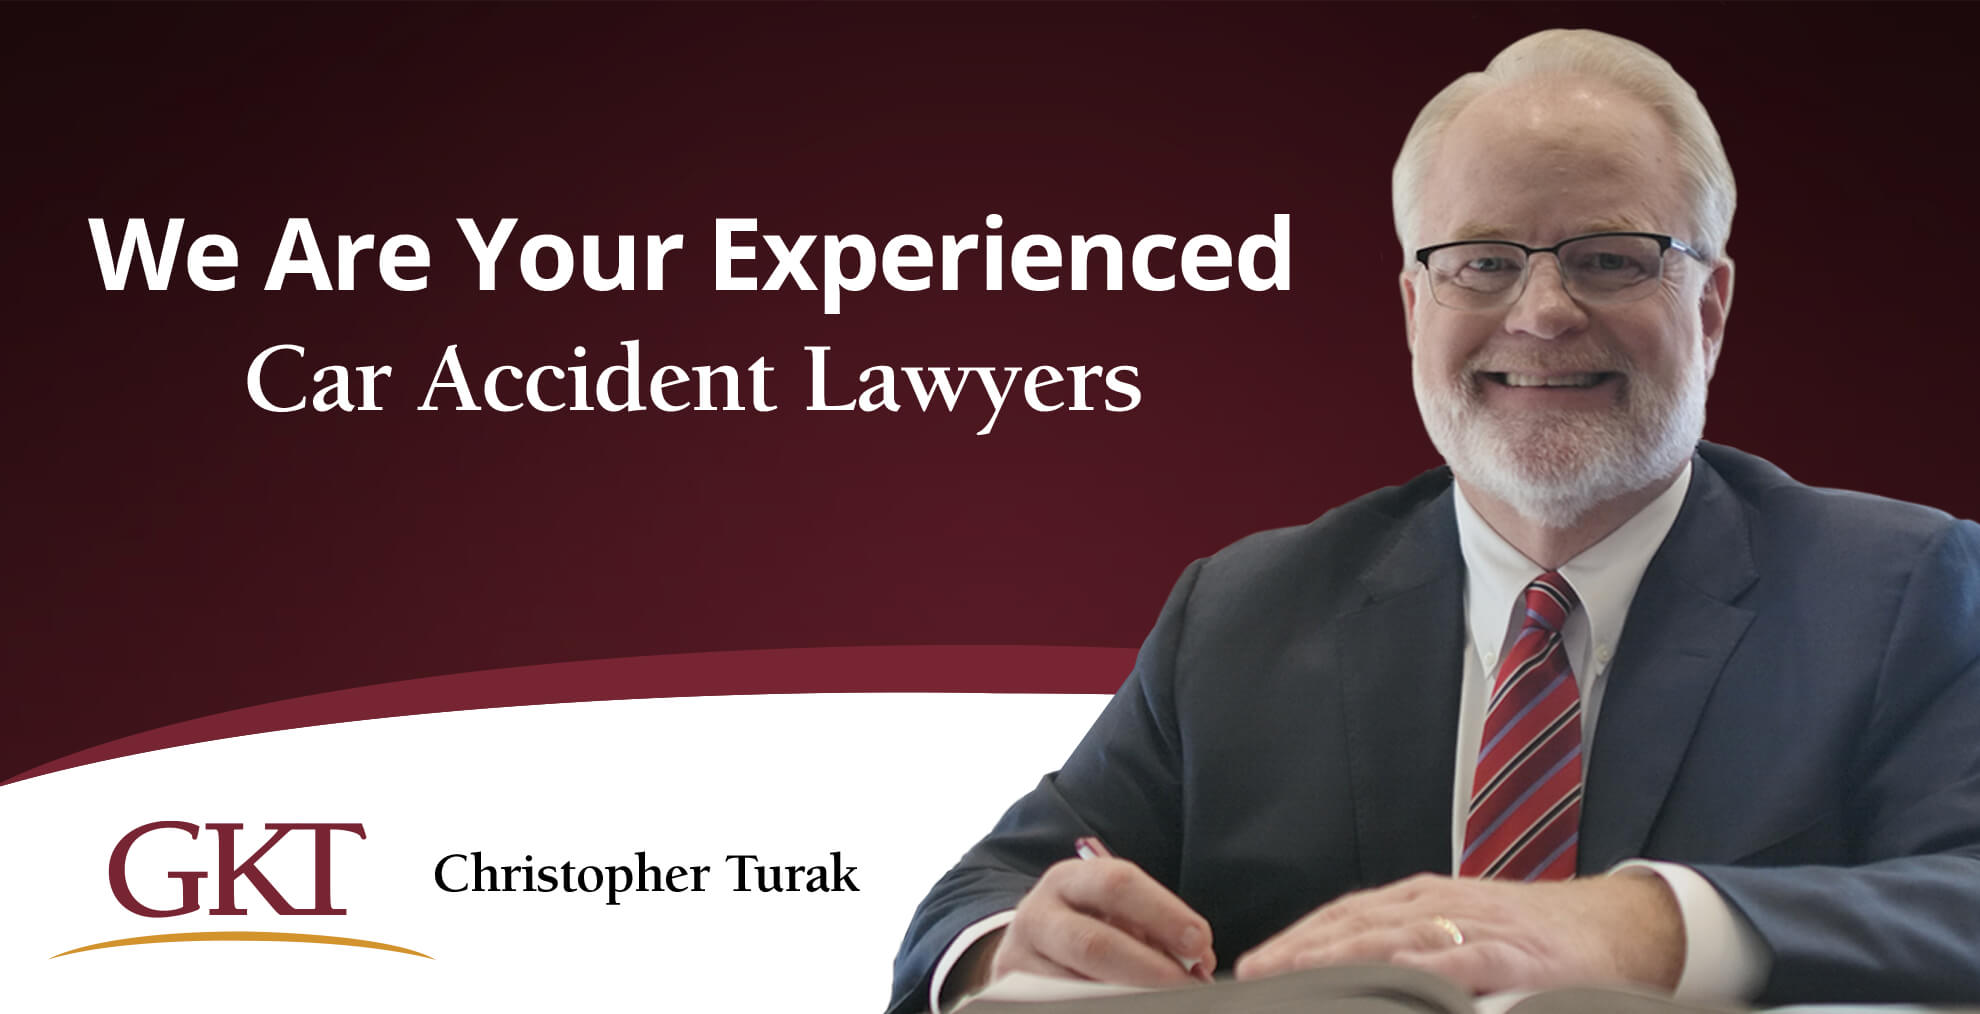 We Are Your Experienced Car Accident Lawyers - Christopher Turak